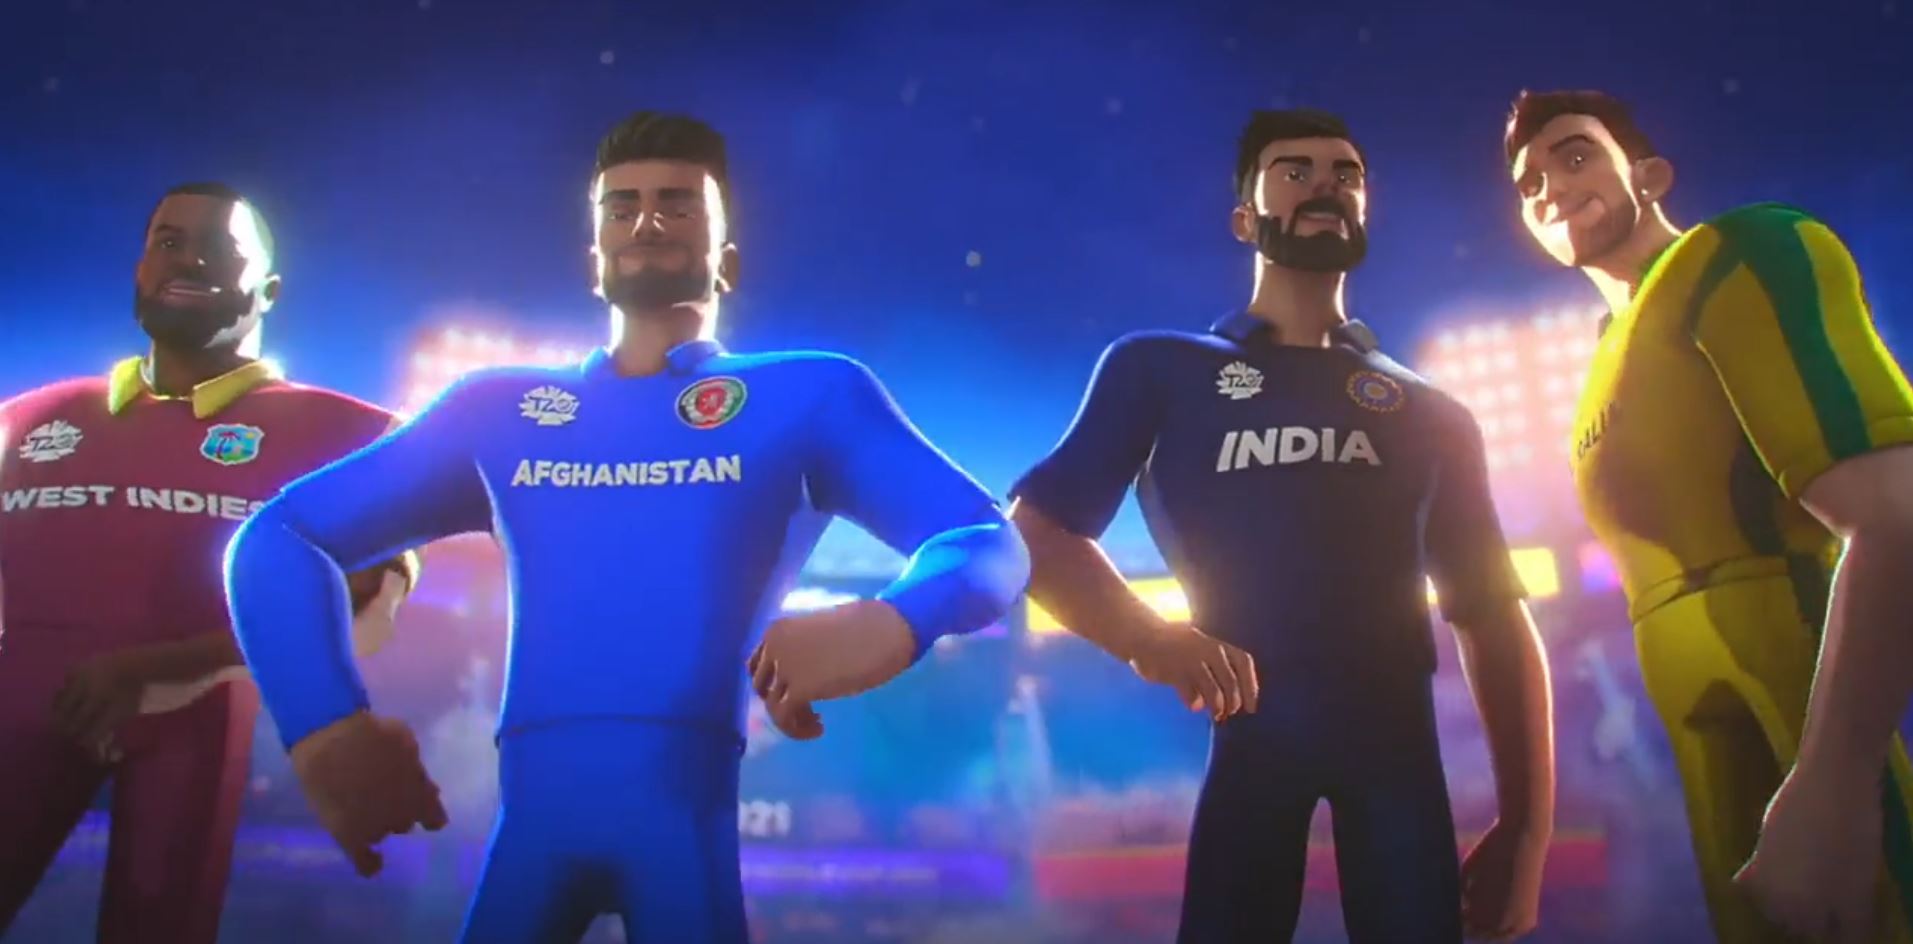 The video has animated avatars of popular cricketers | Screengrab